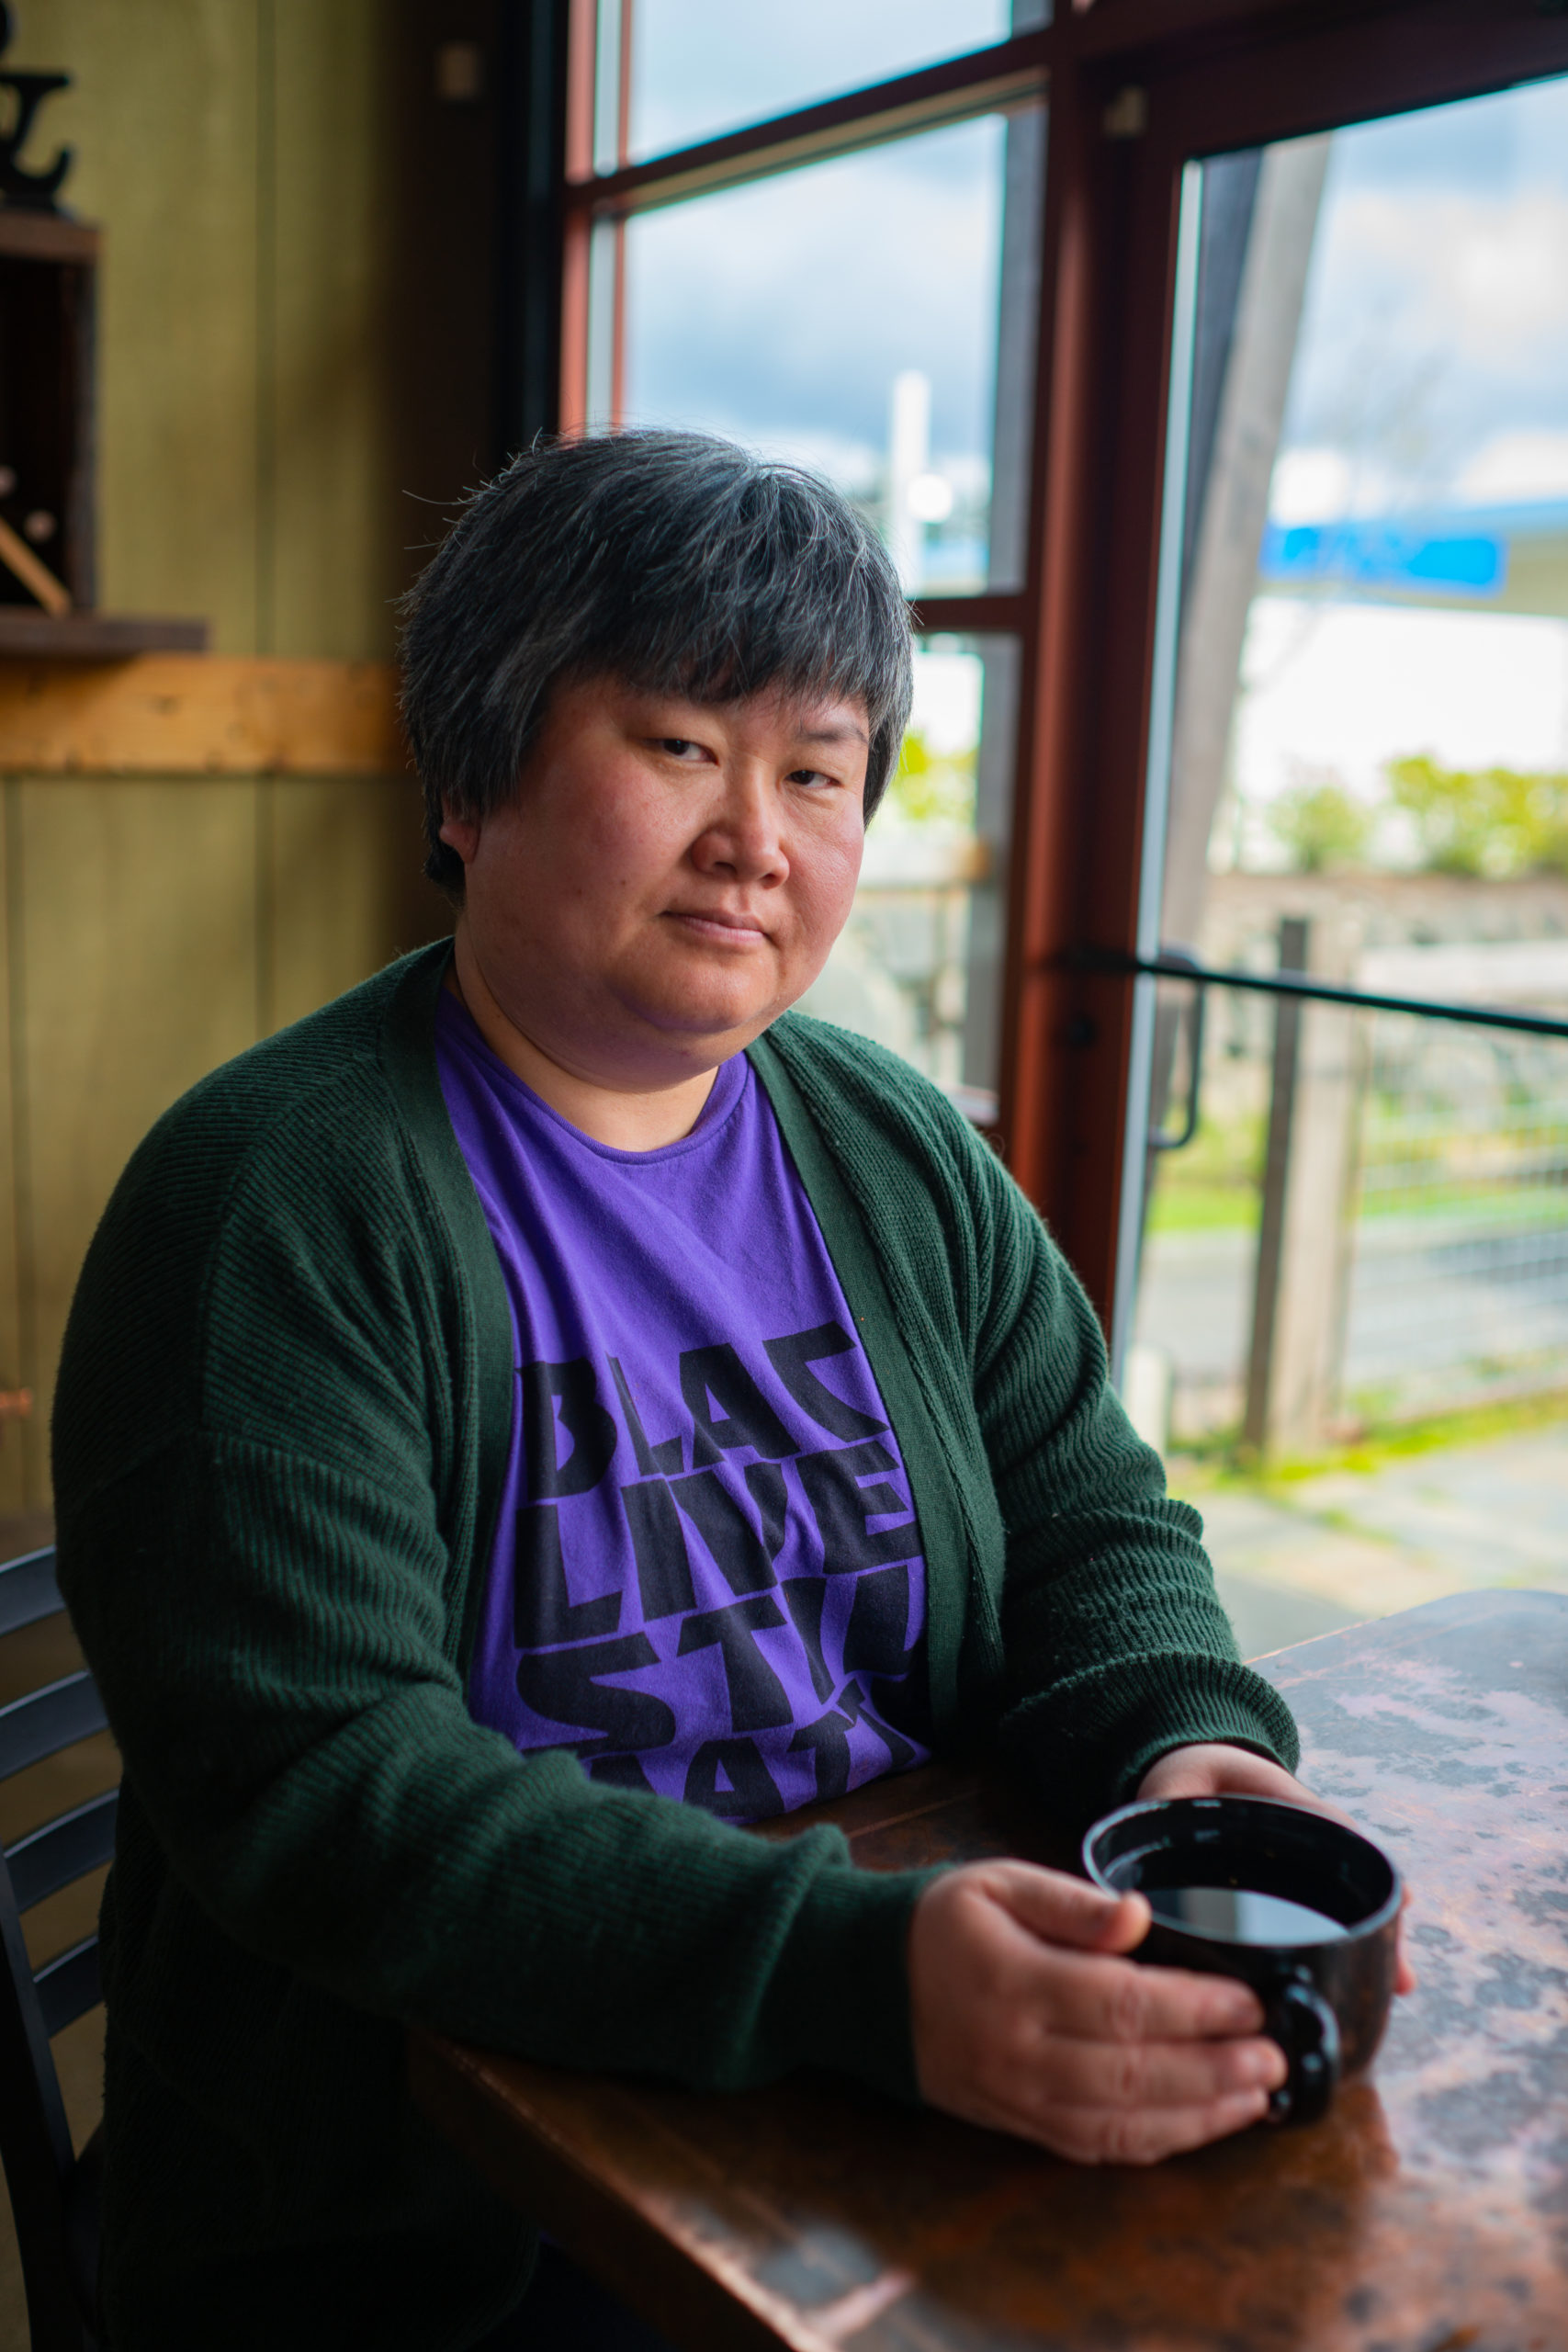 A Chinese-American woman at a Pacific Northwest coffee shop during a photoshoot with a body-positive portrait photographer.